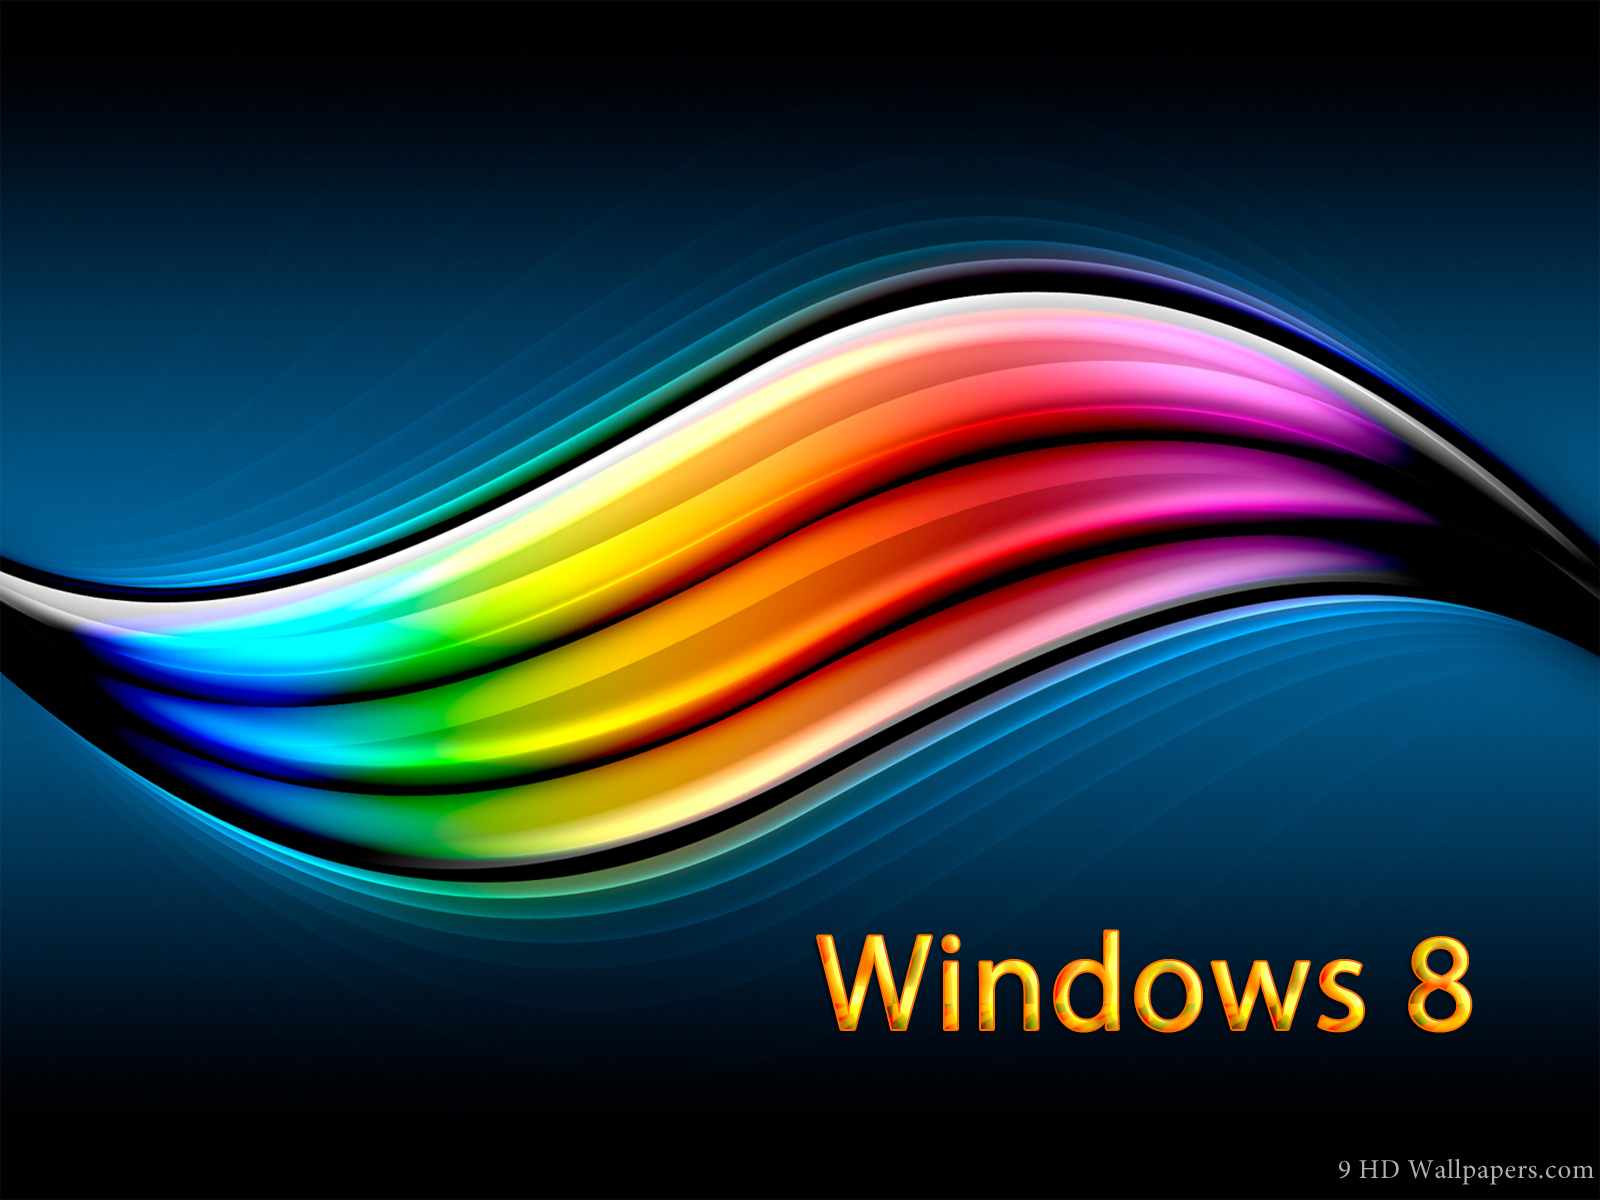 Windows 8 HD Wallpapers Free Download